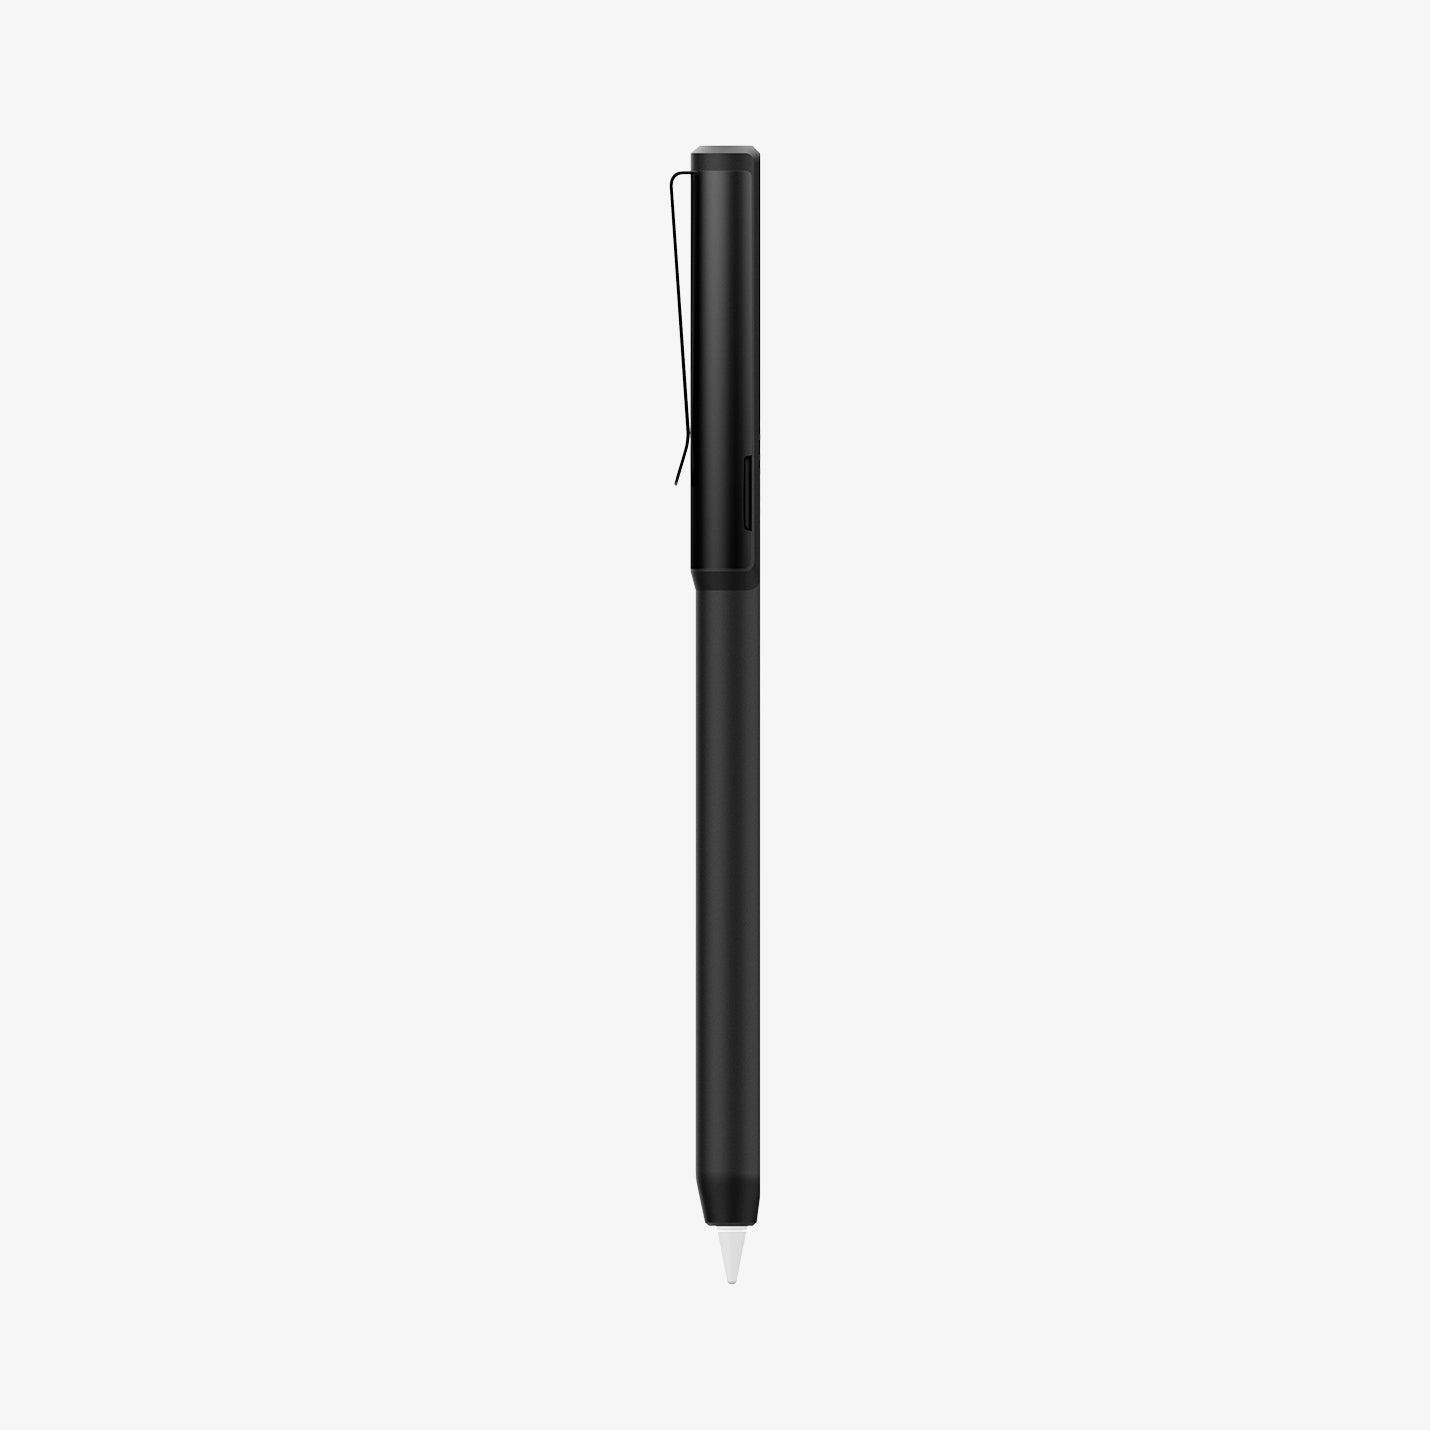 ACS05763 - Apple Pencil Holder DA201 in black showing the side